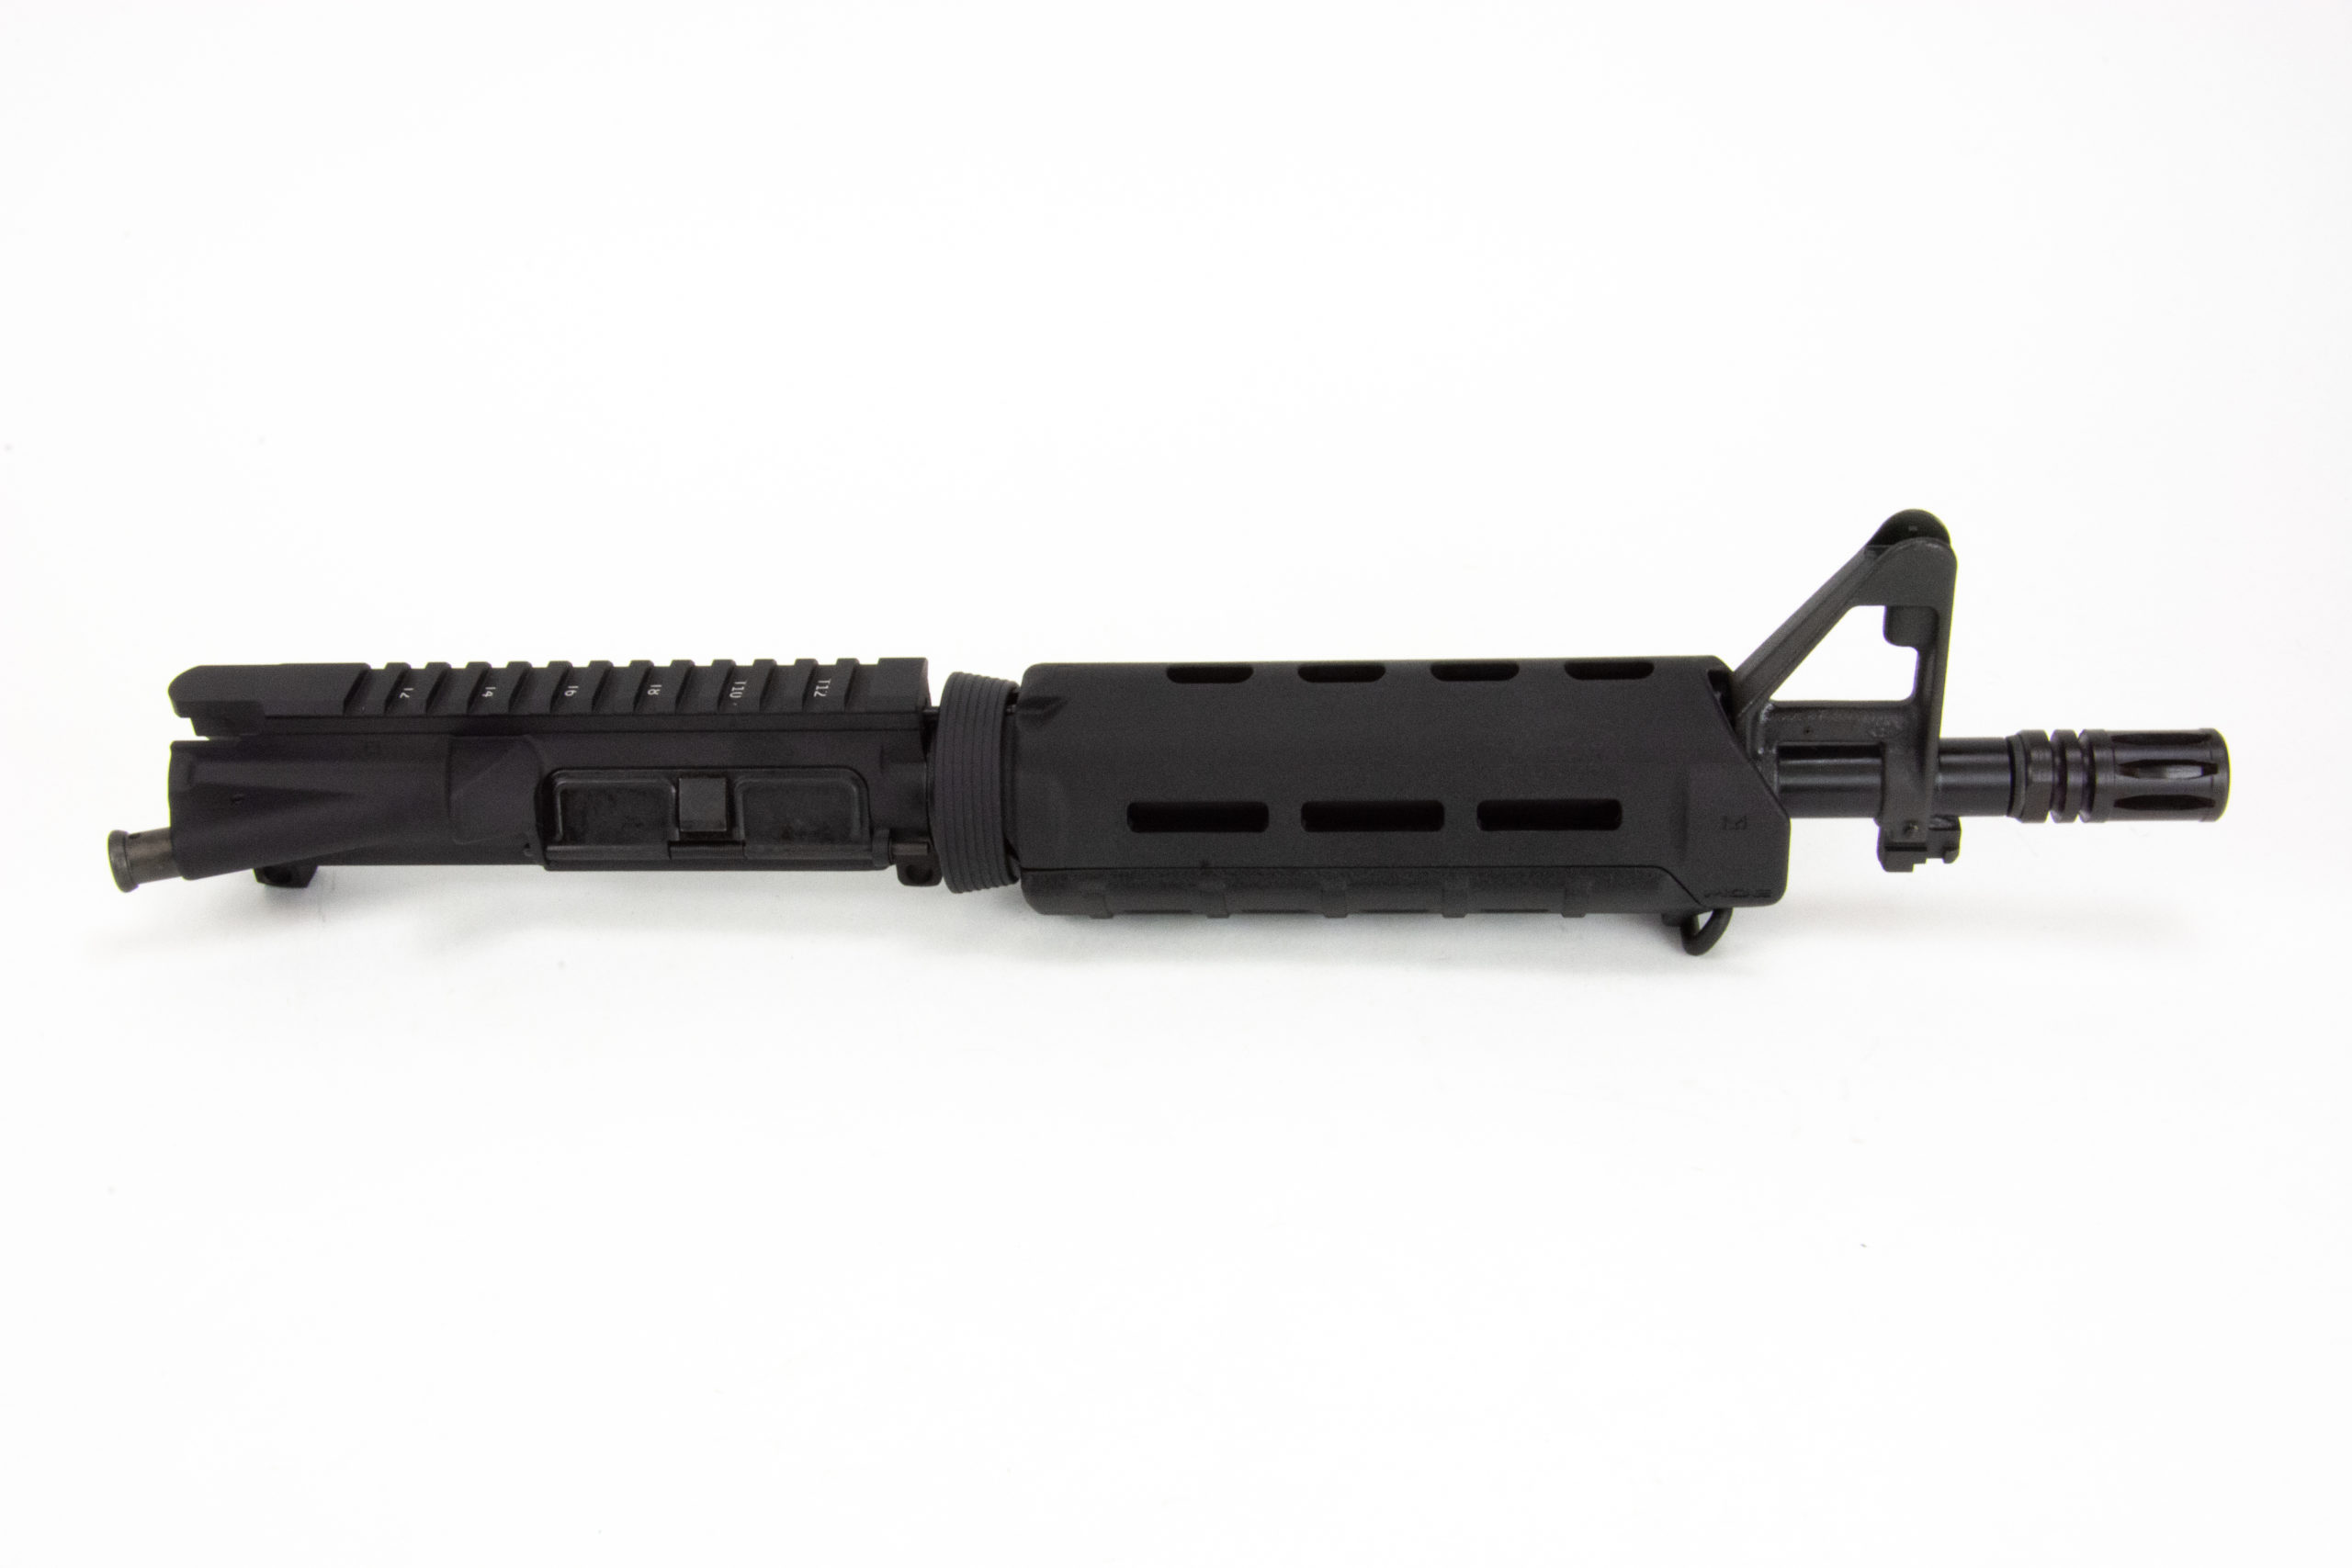 Includes: BKF Dry Film Lubed Assembled Upper Receiver w/ T-Marks Magpul Moe...